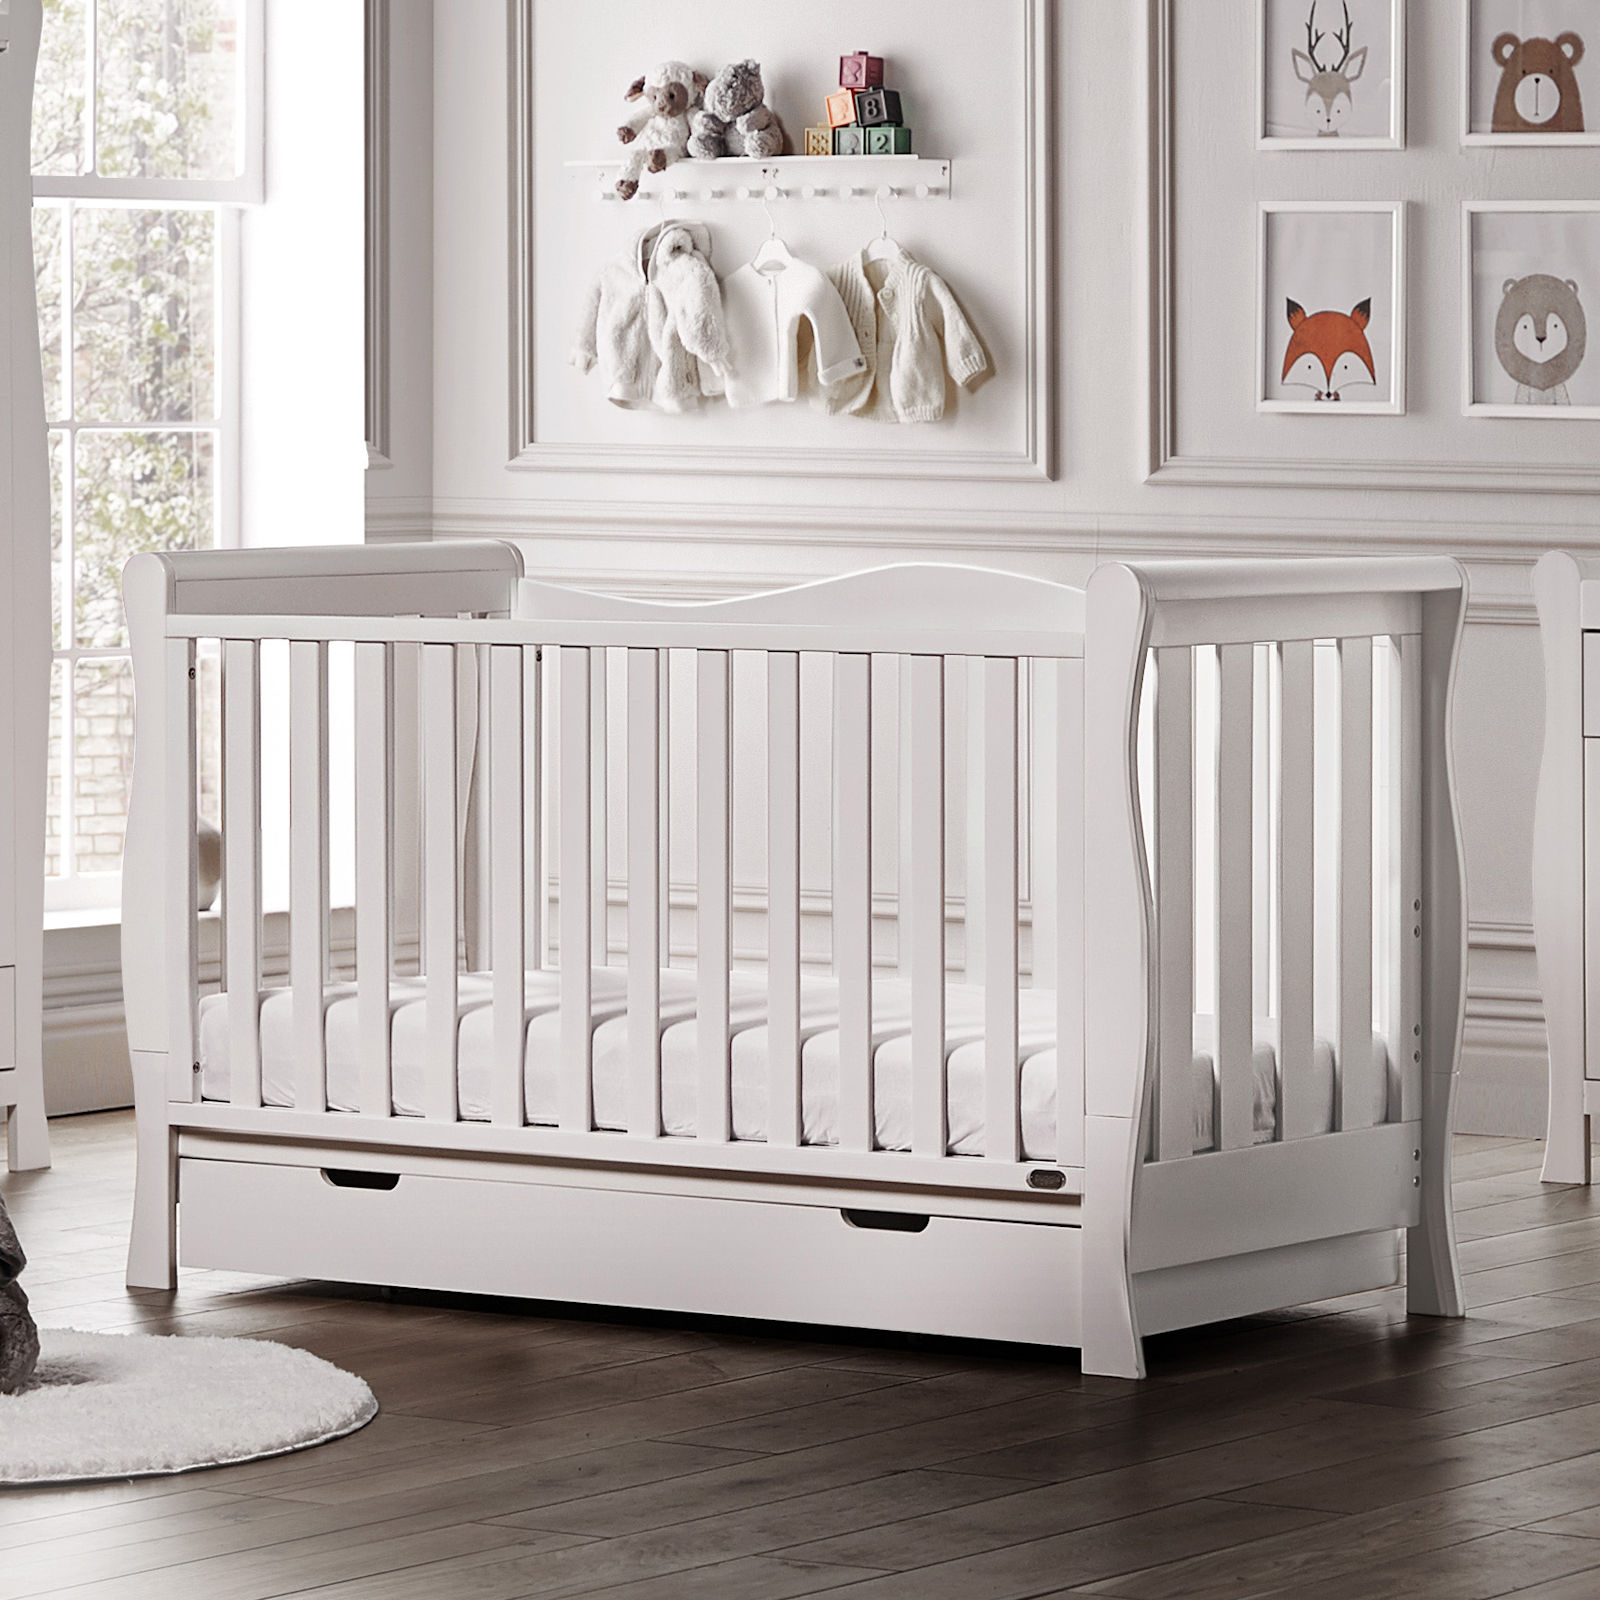 Puggle Prestbury Imperial Luxe Sleigh Cot Bed & Drawer - White